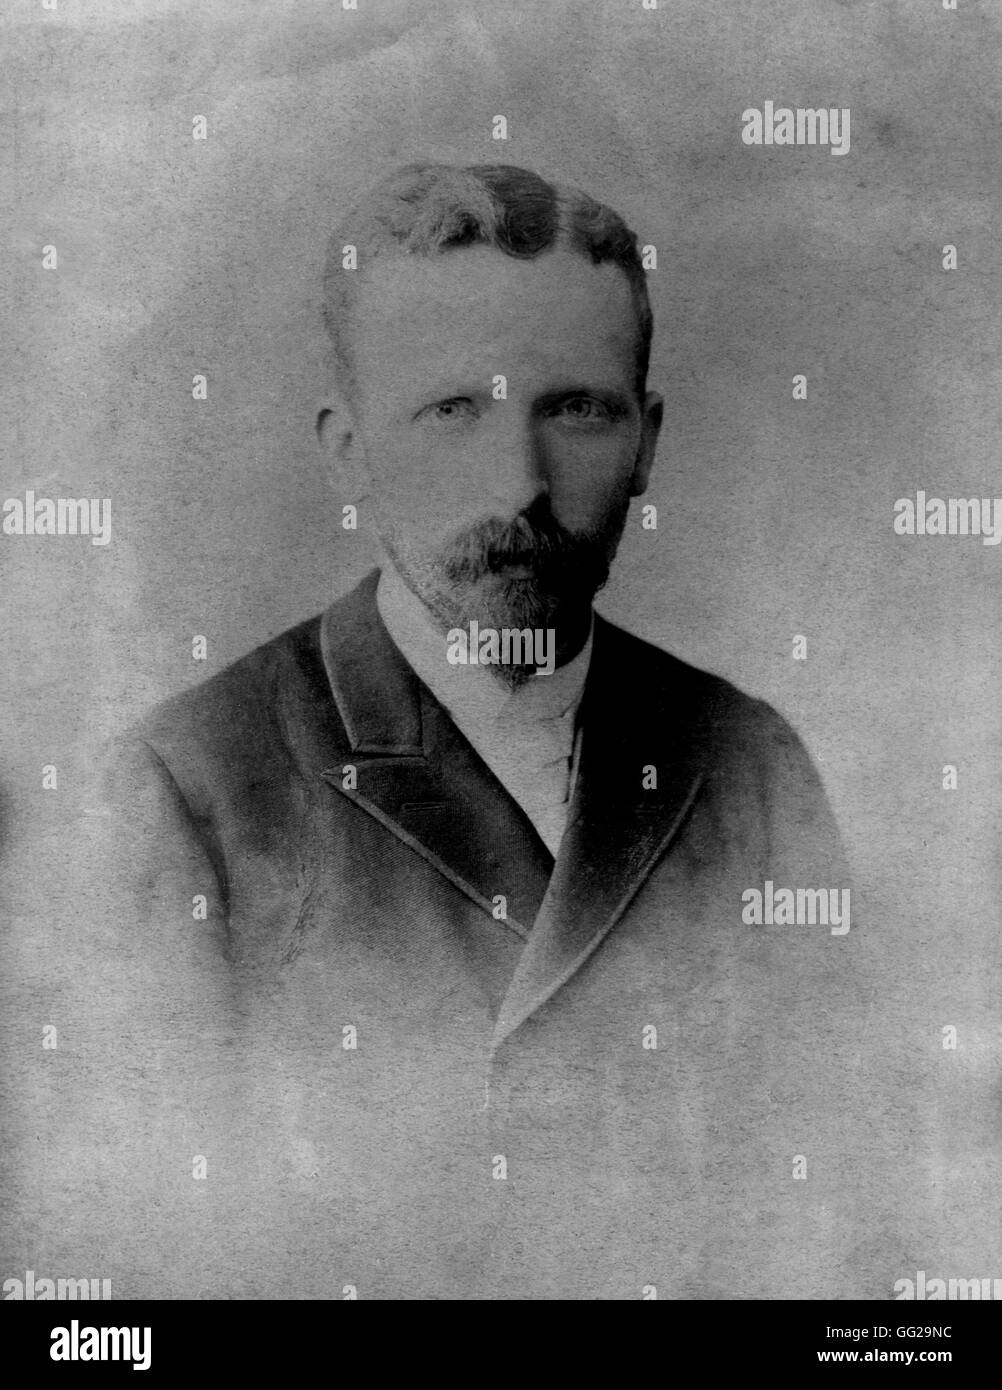 Portrait of Théo Van Gogh from the Auvers-sur-Oise period France 19th century Stock Photo